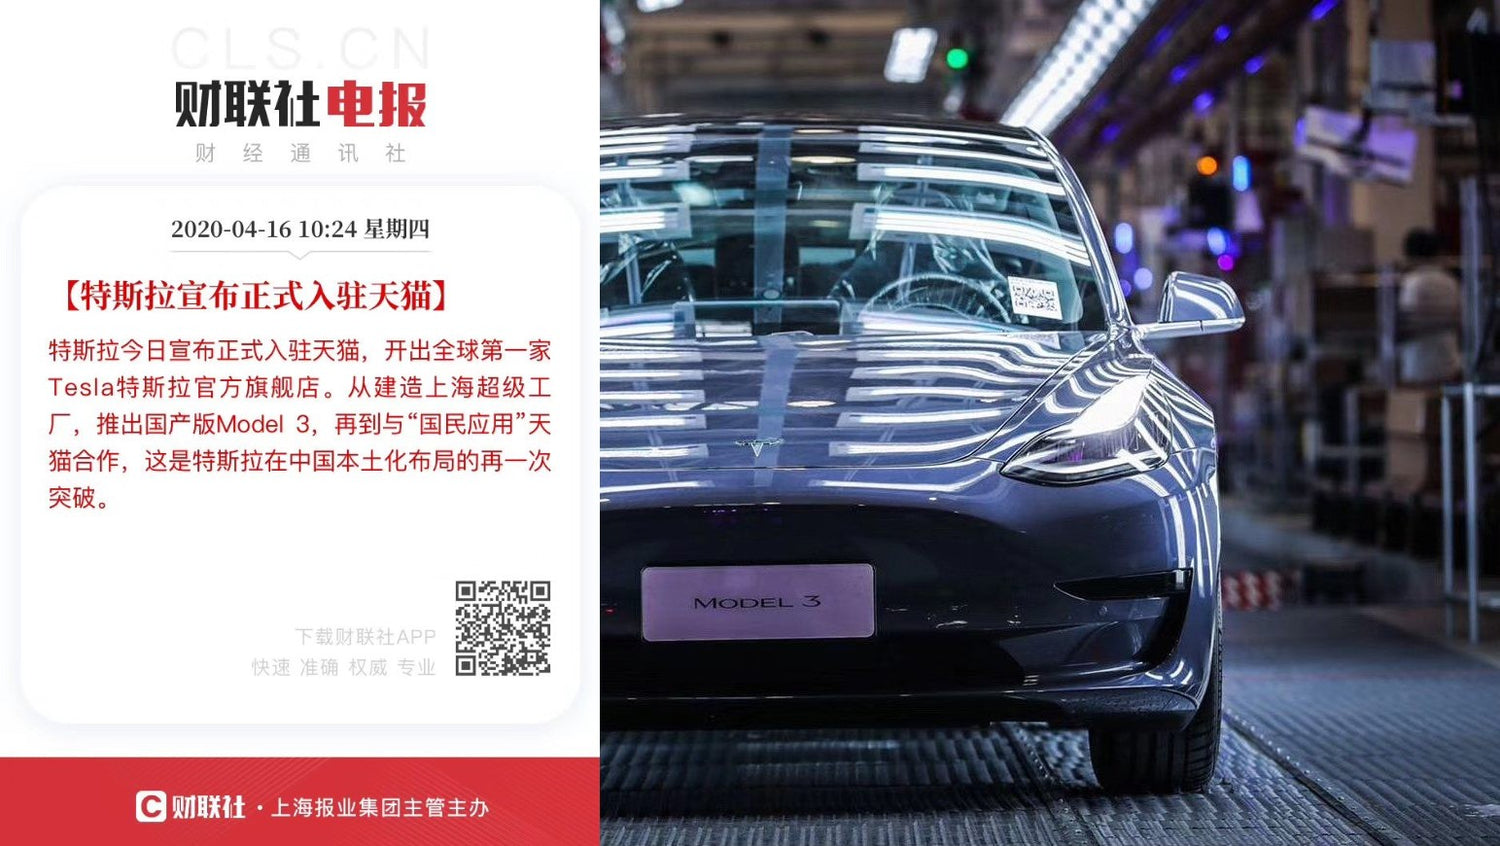 Tesla China Opens Store In Alibaba's Tmall, One of the World's Biggest E-commerce Websites